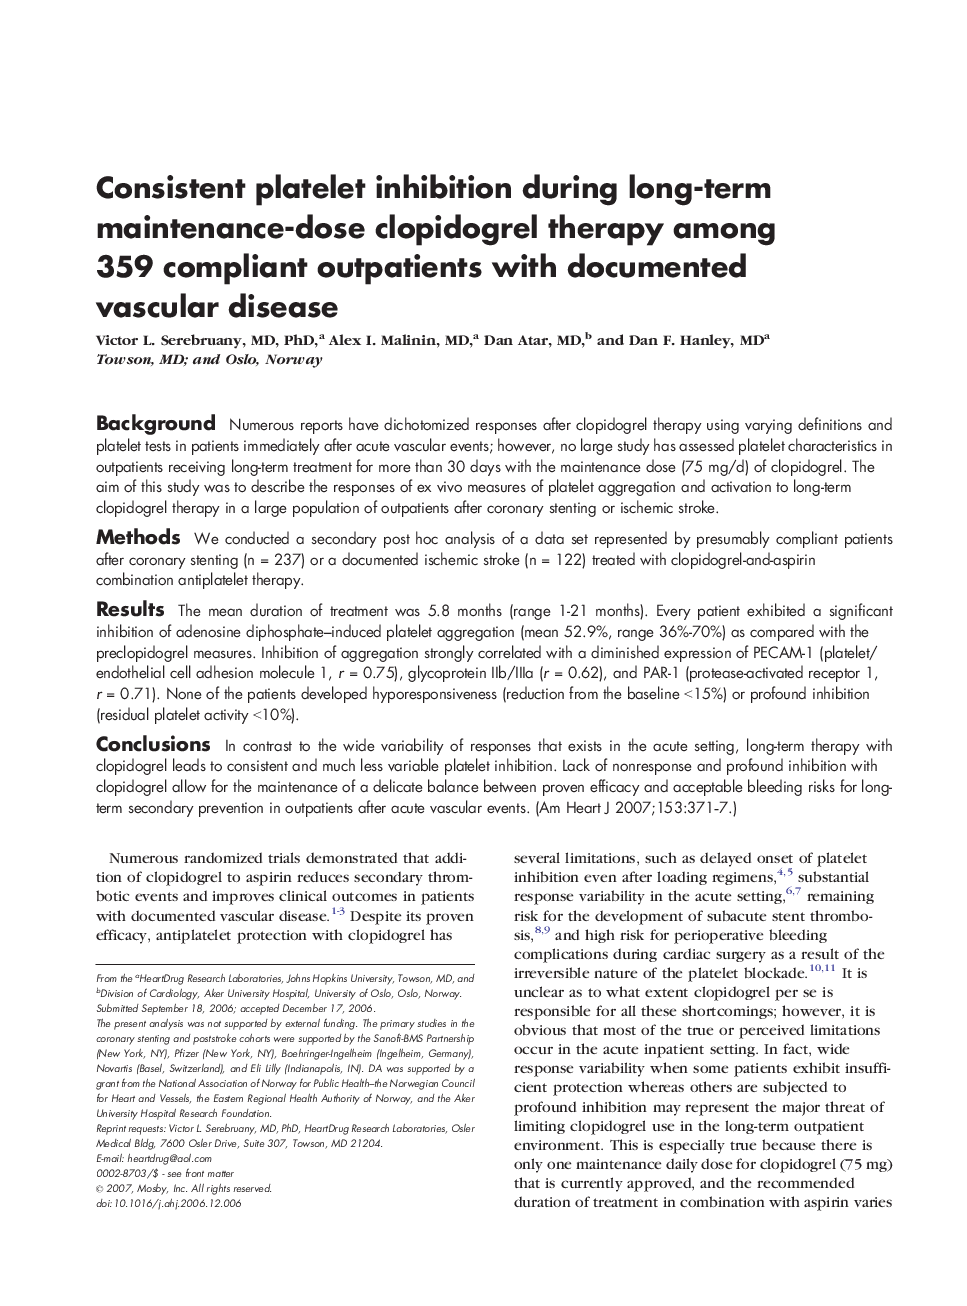 Consistent platelet inhibition during long-term maintenance-dose clopidogrel therapy among 359 compliant outpatients with documented vascular disease 